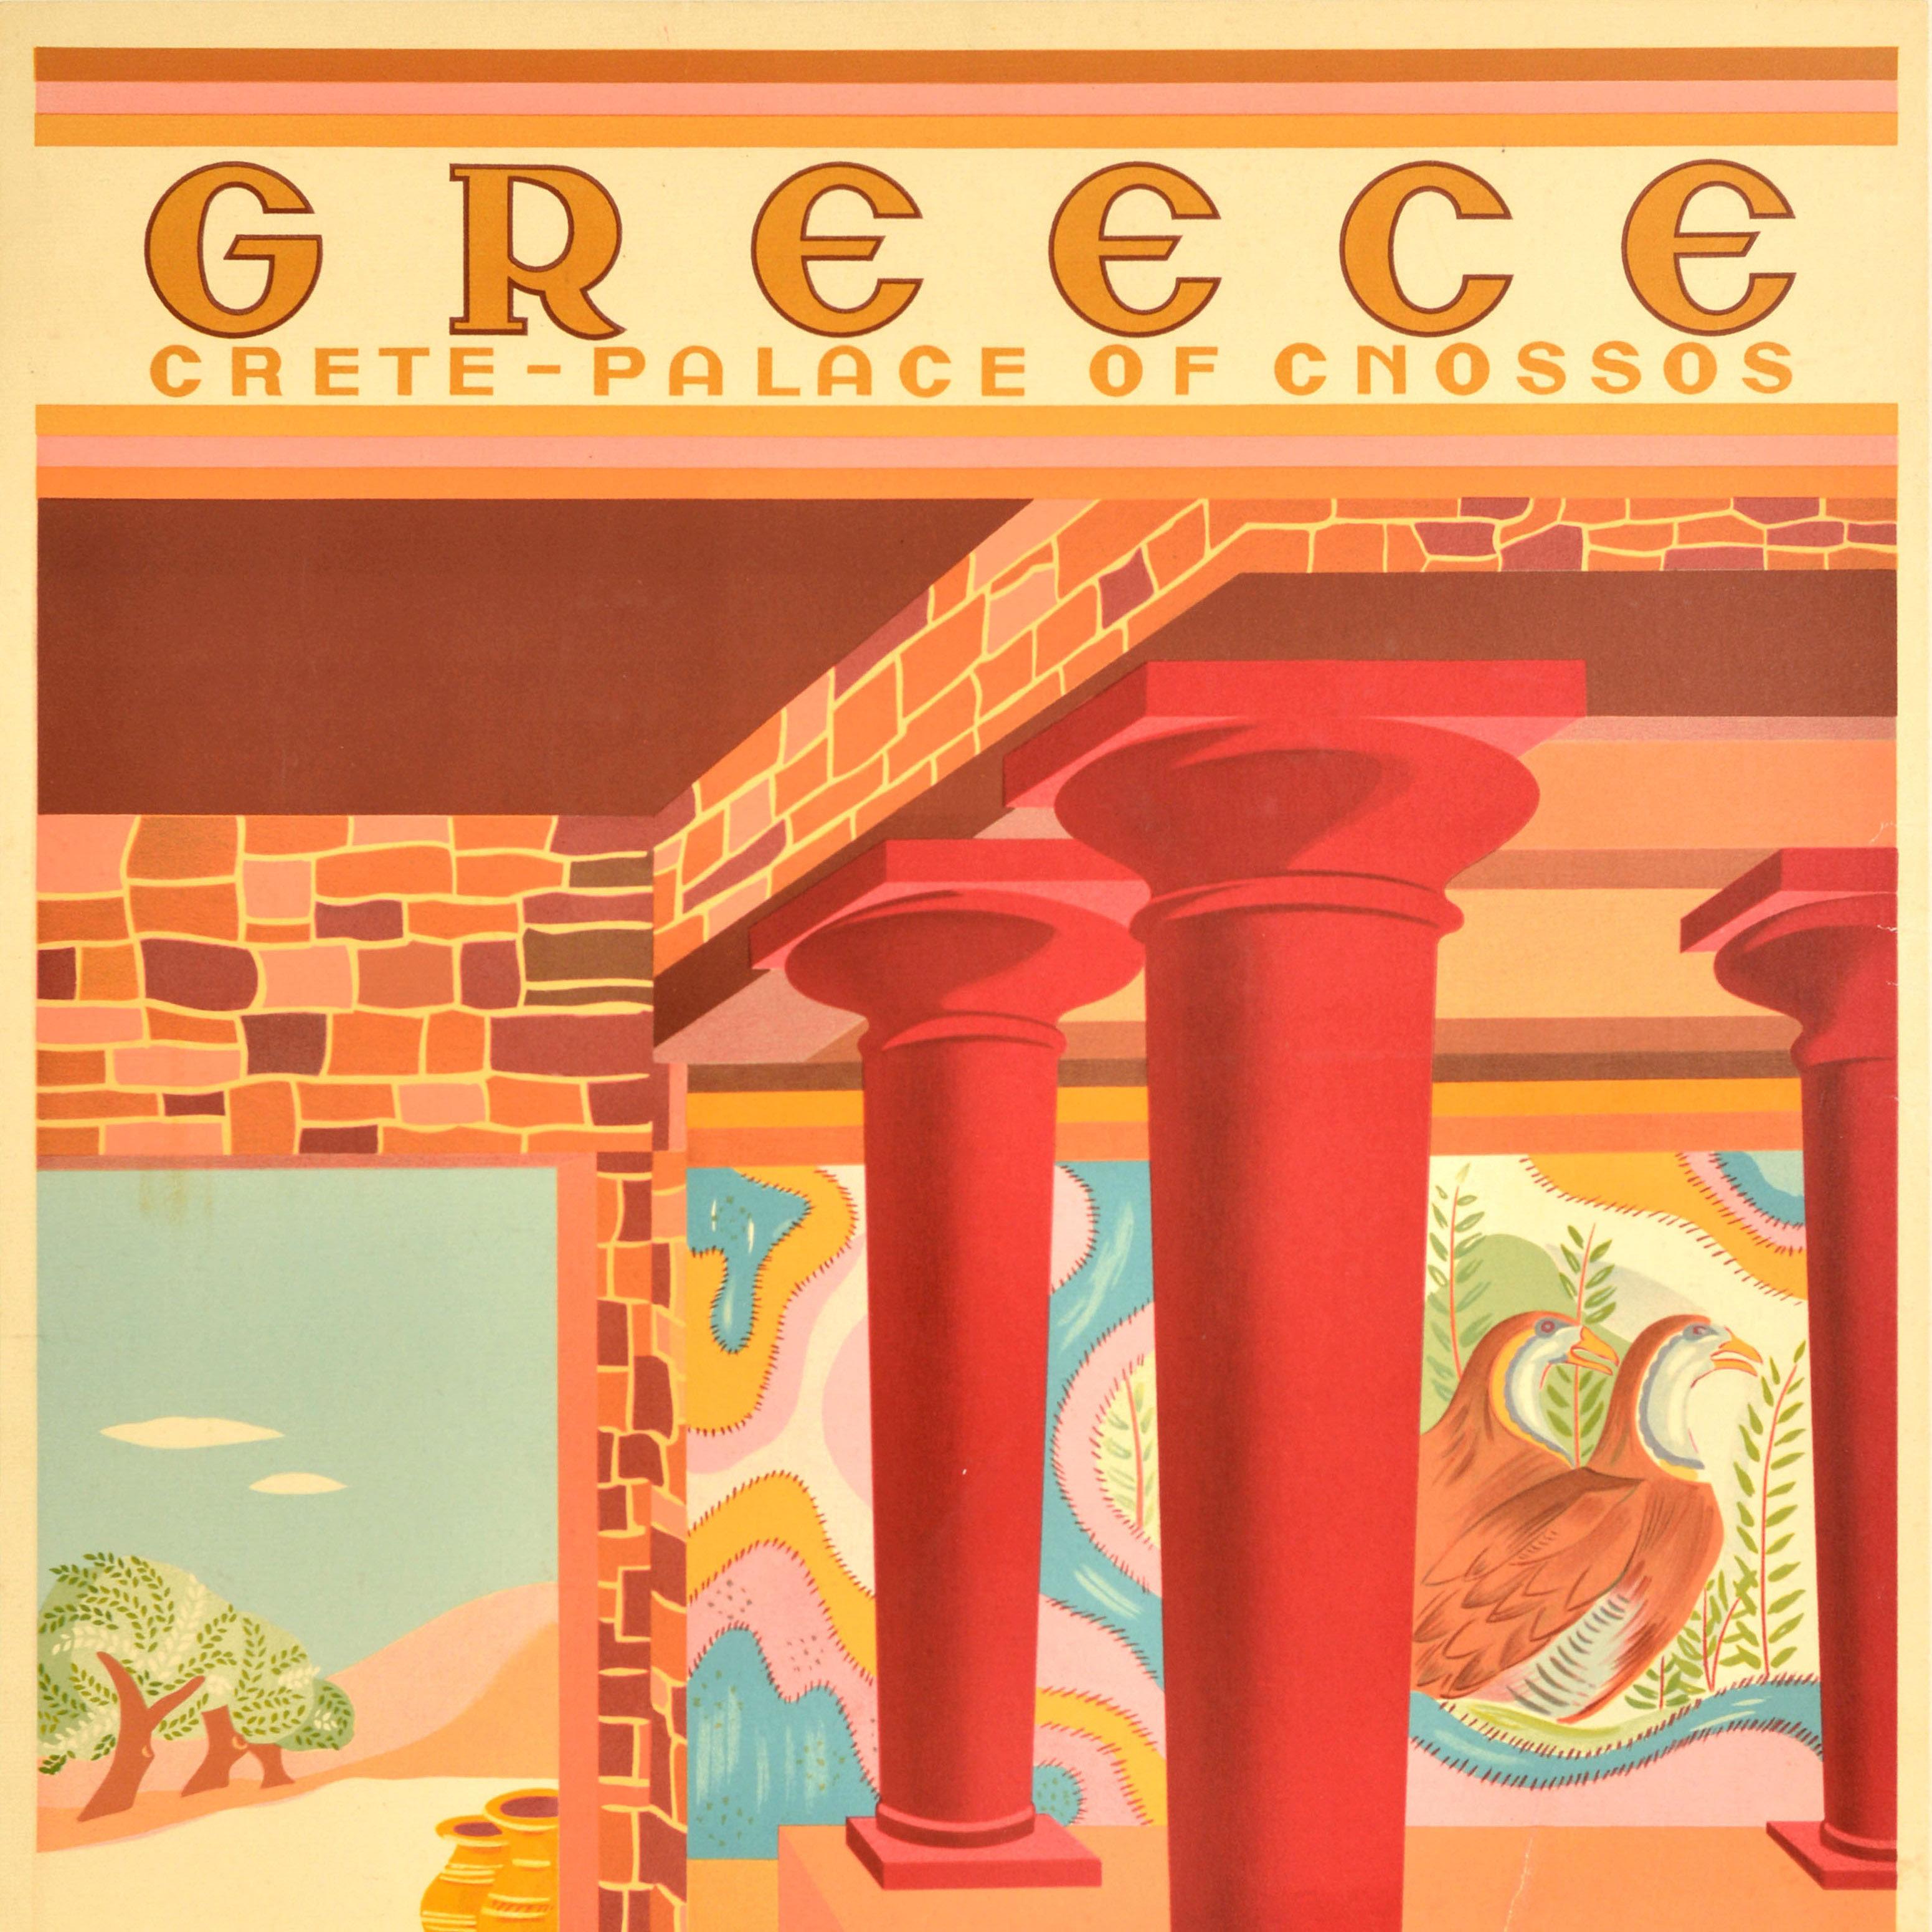 Original vintage cruise travel advertising poster - Greece Crete Palace of Cnossos on the Greek Line T.S.S. Olympia - featuring a colourful illustration of the ancient Minoan Palace of Knossos in Heraklion on the Mediterranean Sea island of Crete,